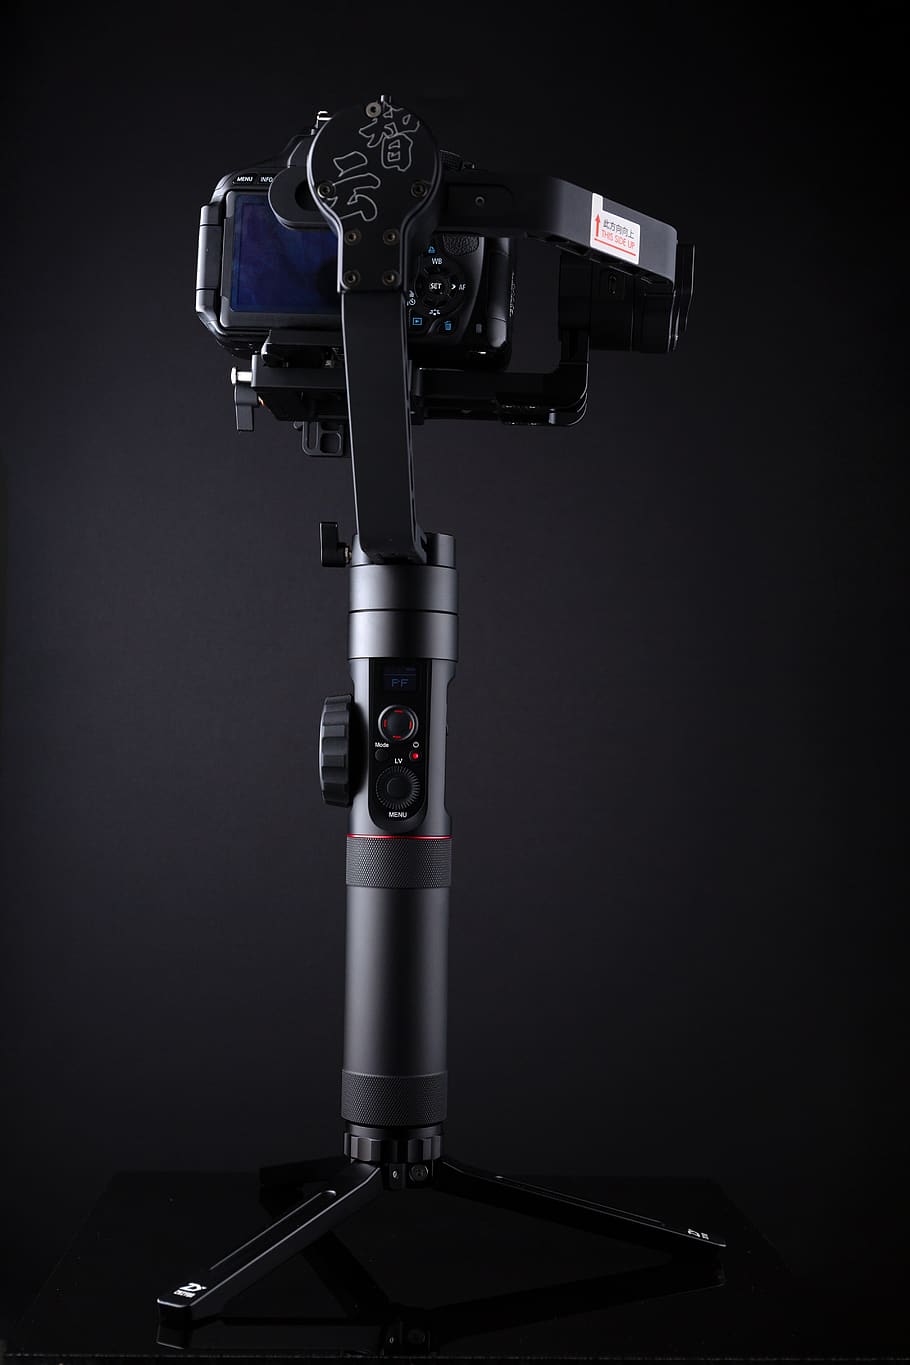 gimbal-stabilizer-video-production.jpg